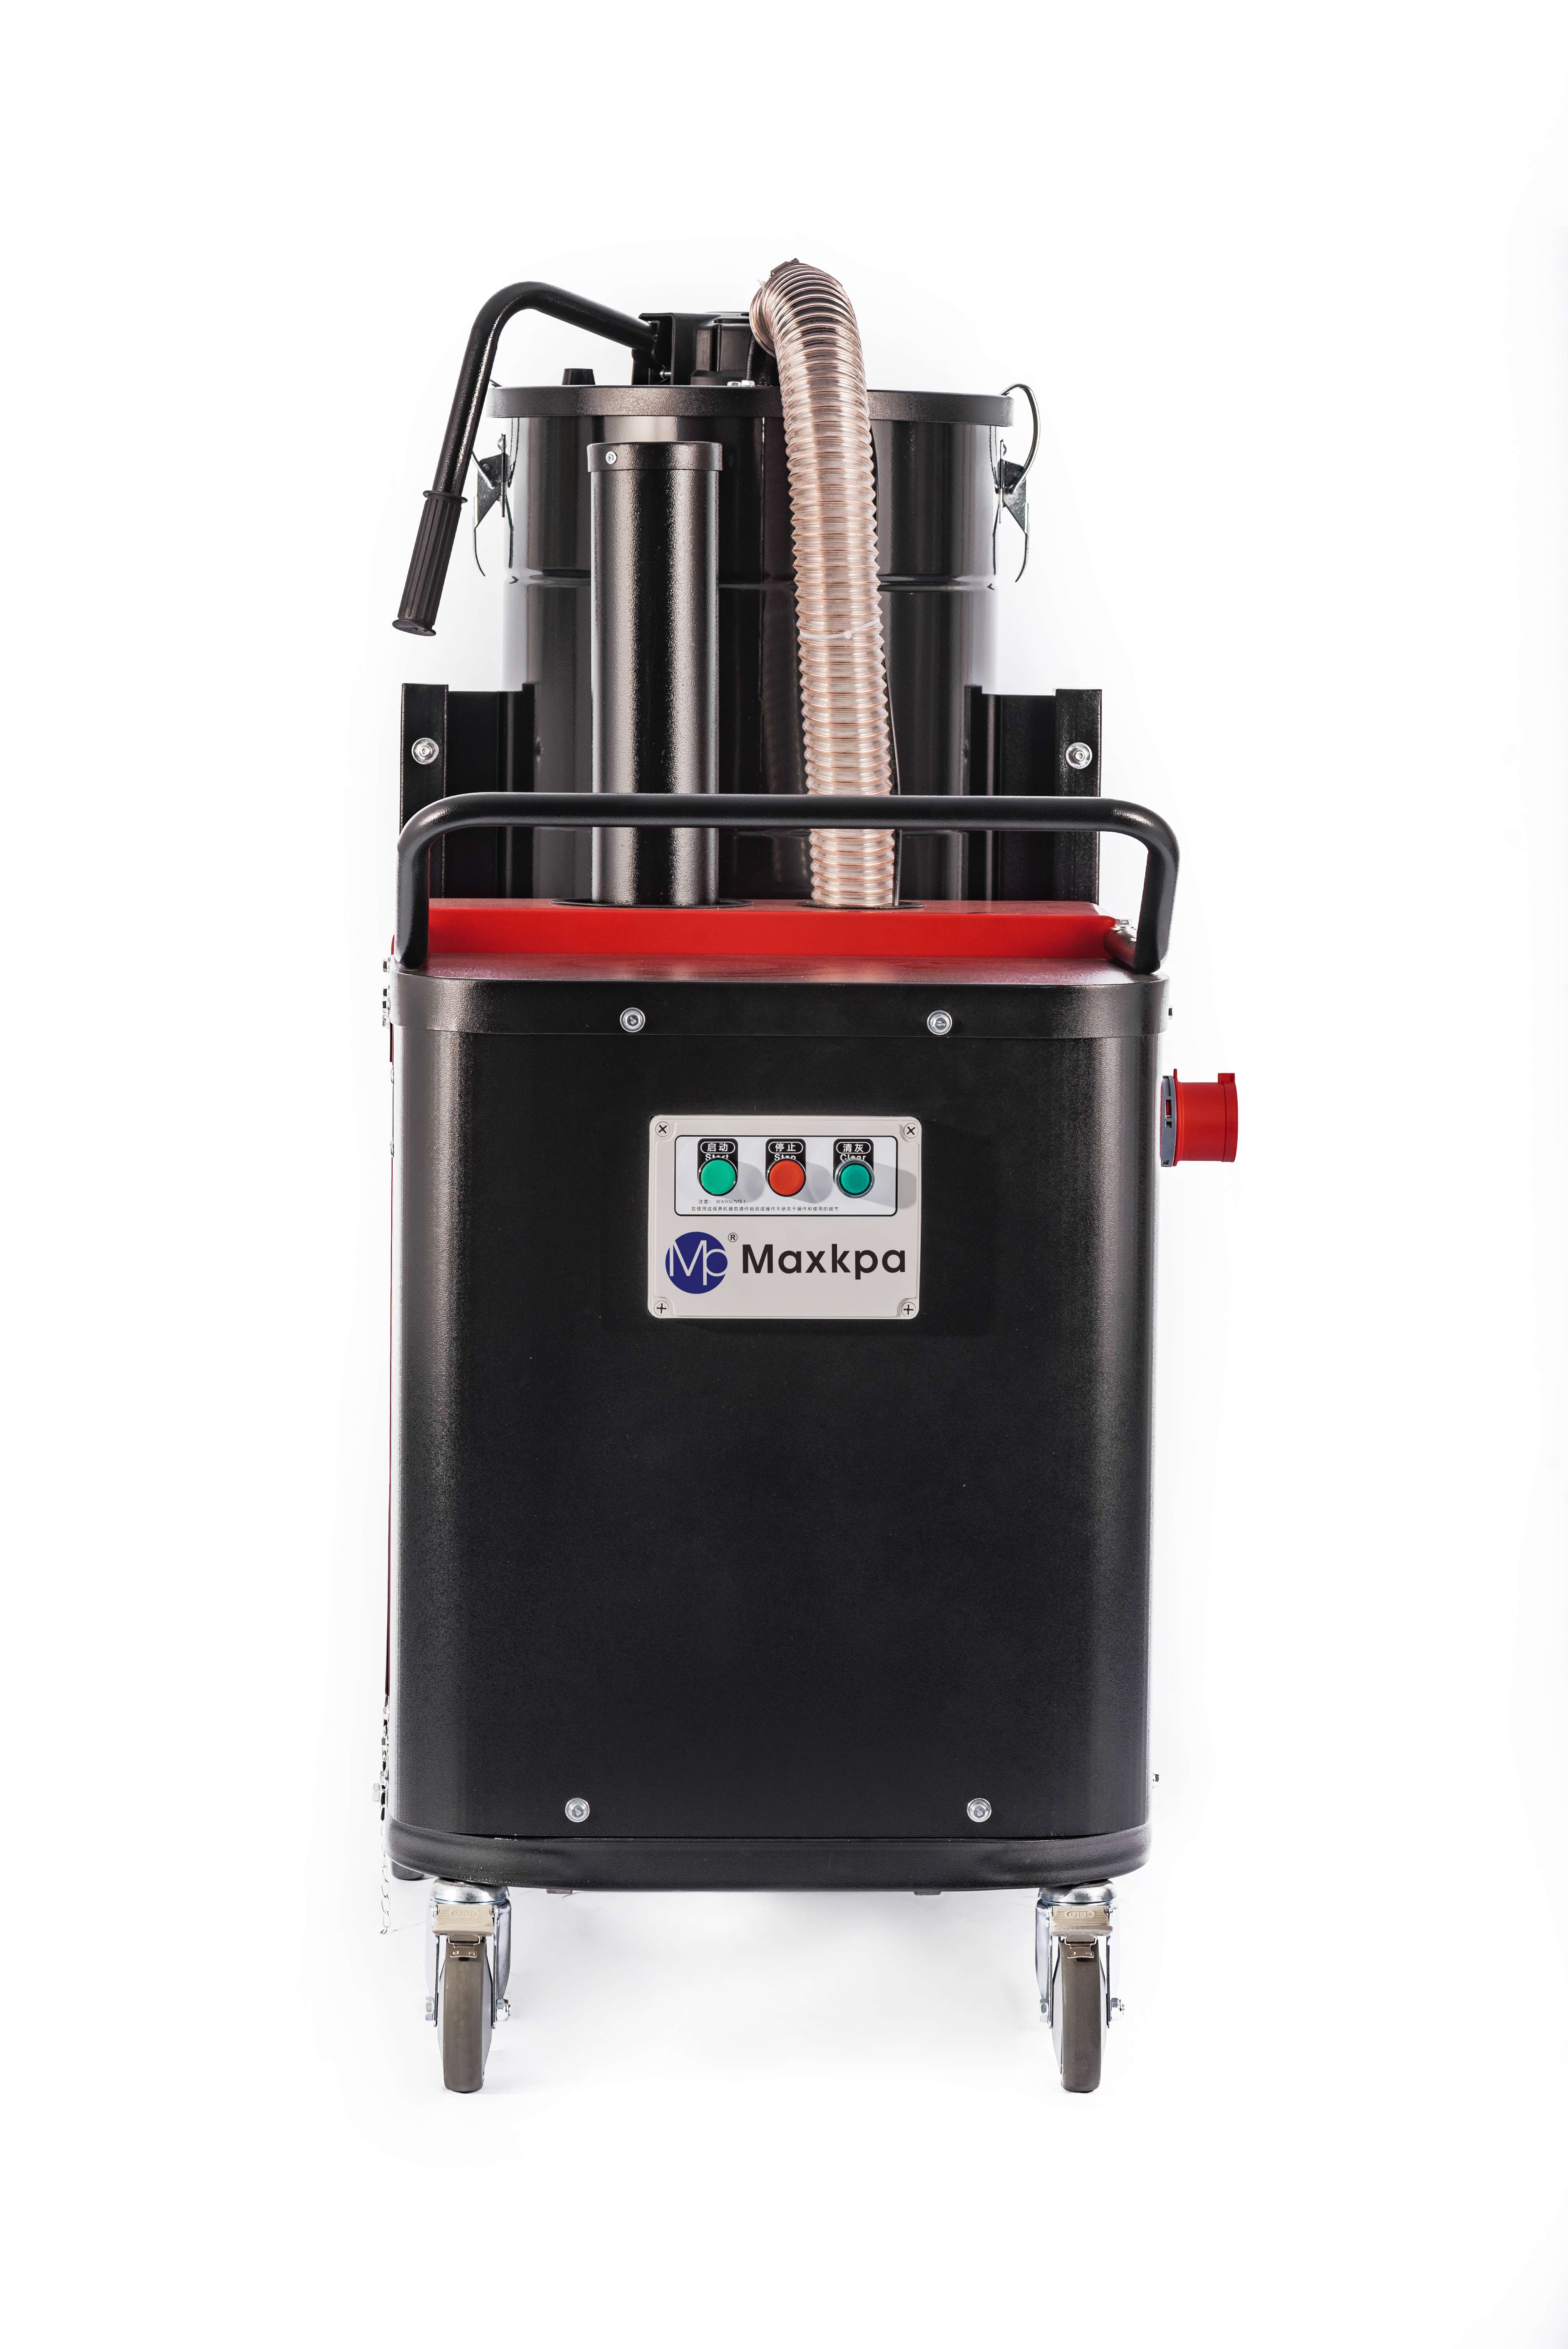 Industrial Vacuum Cleaners – The Future of Cleaning in Industries